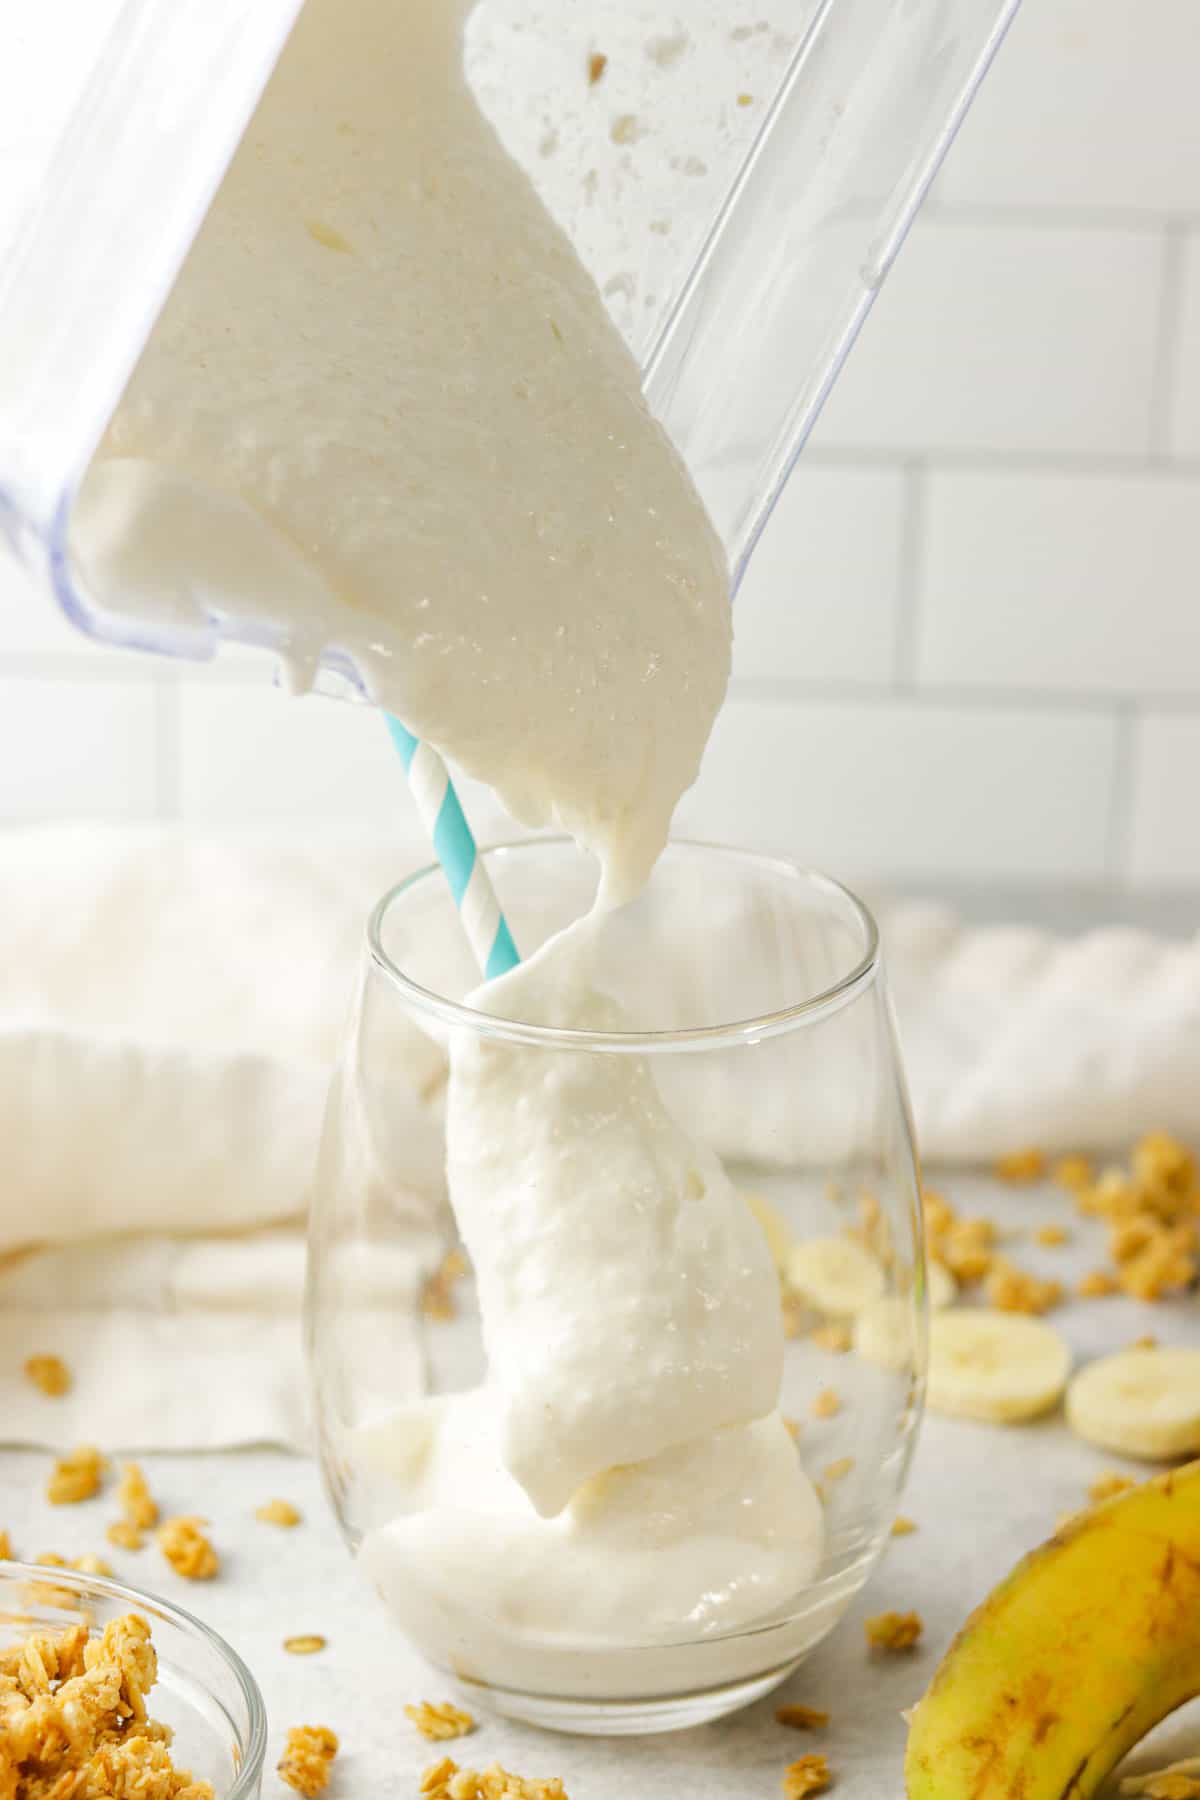 pouring a banana protein shake into a glass.